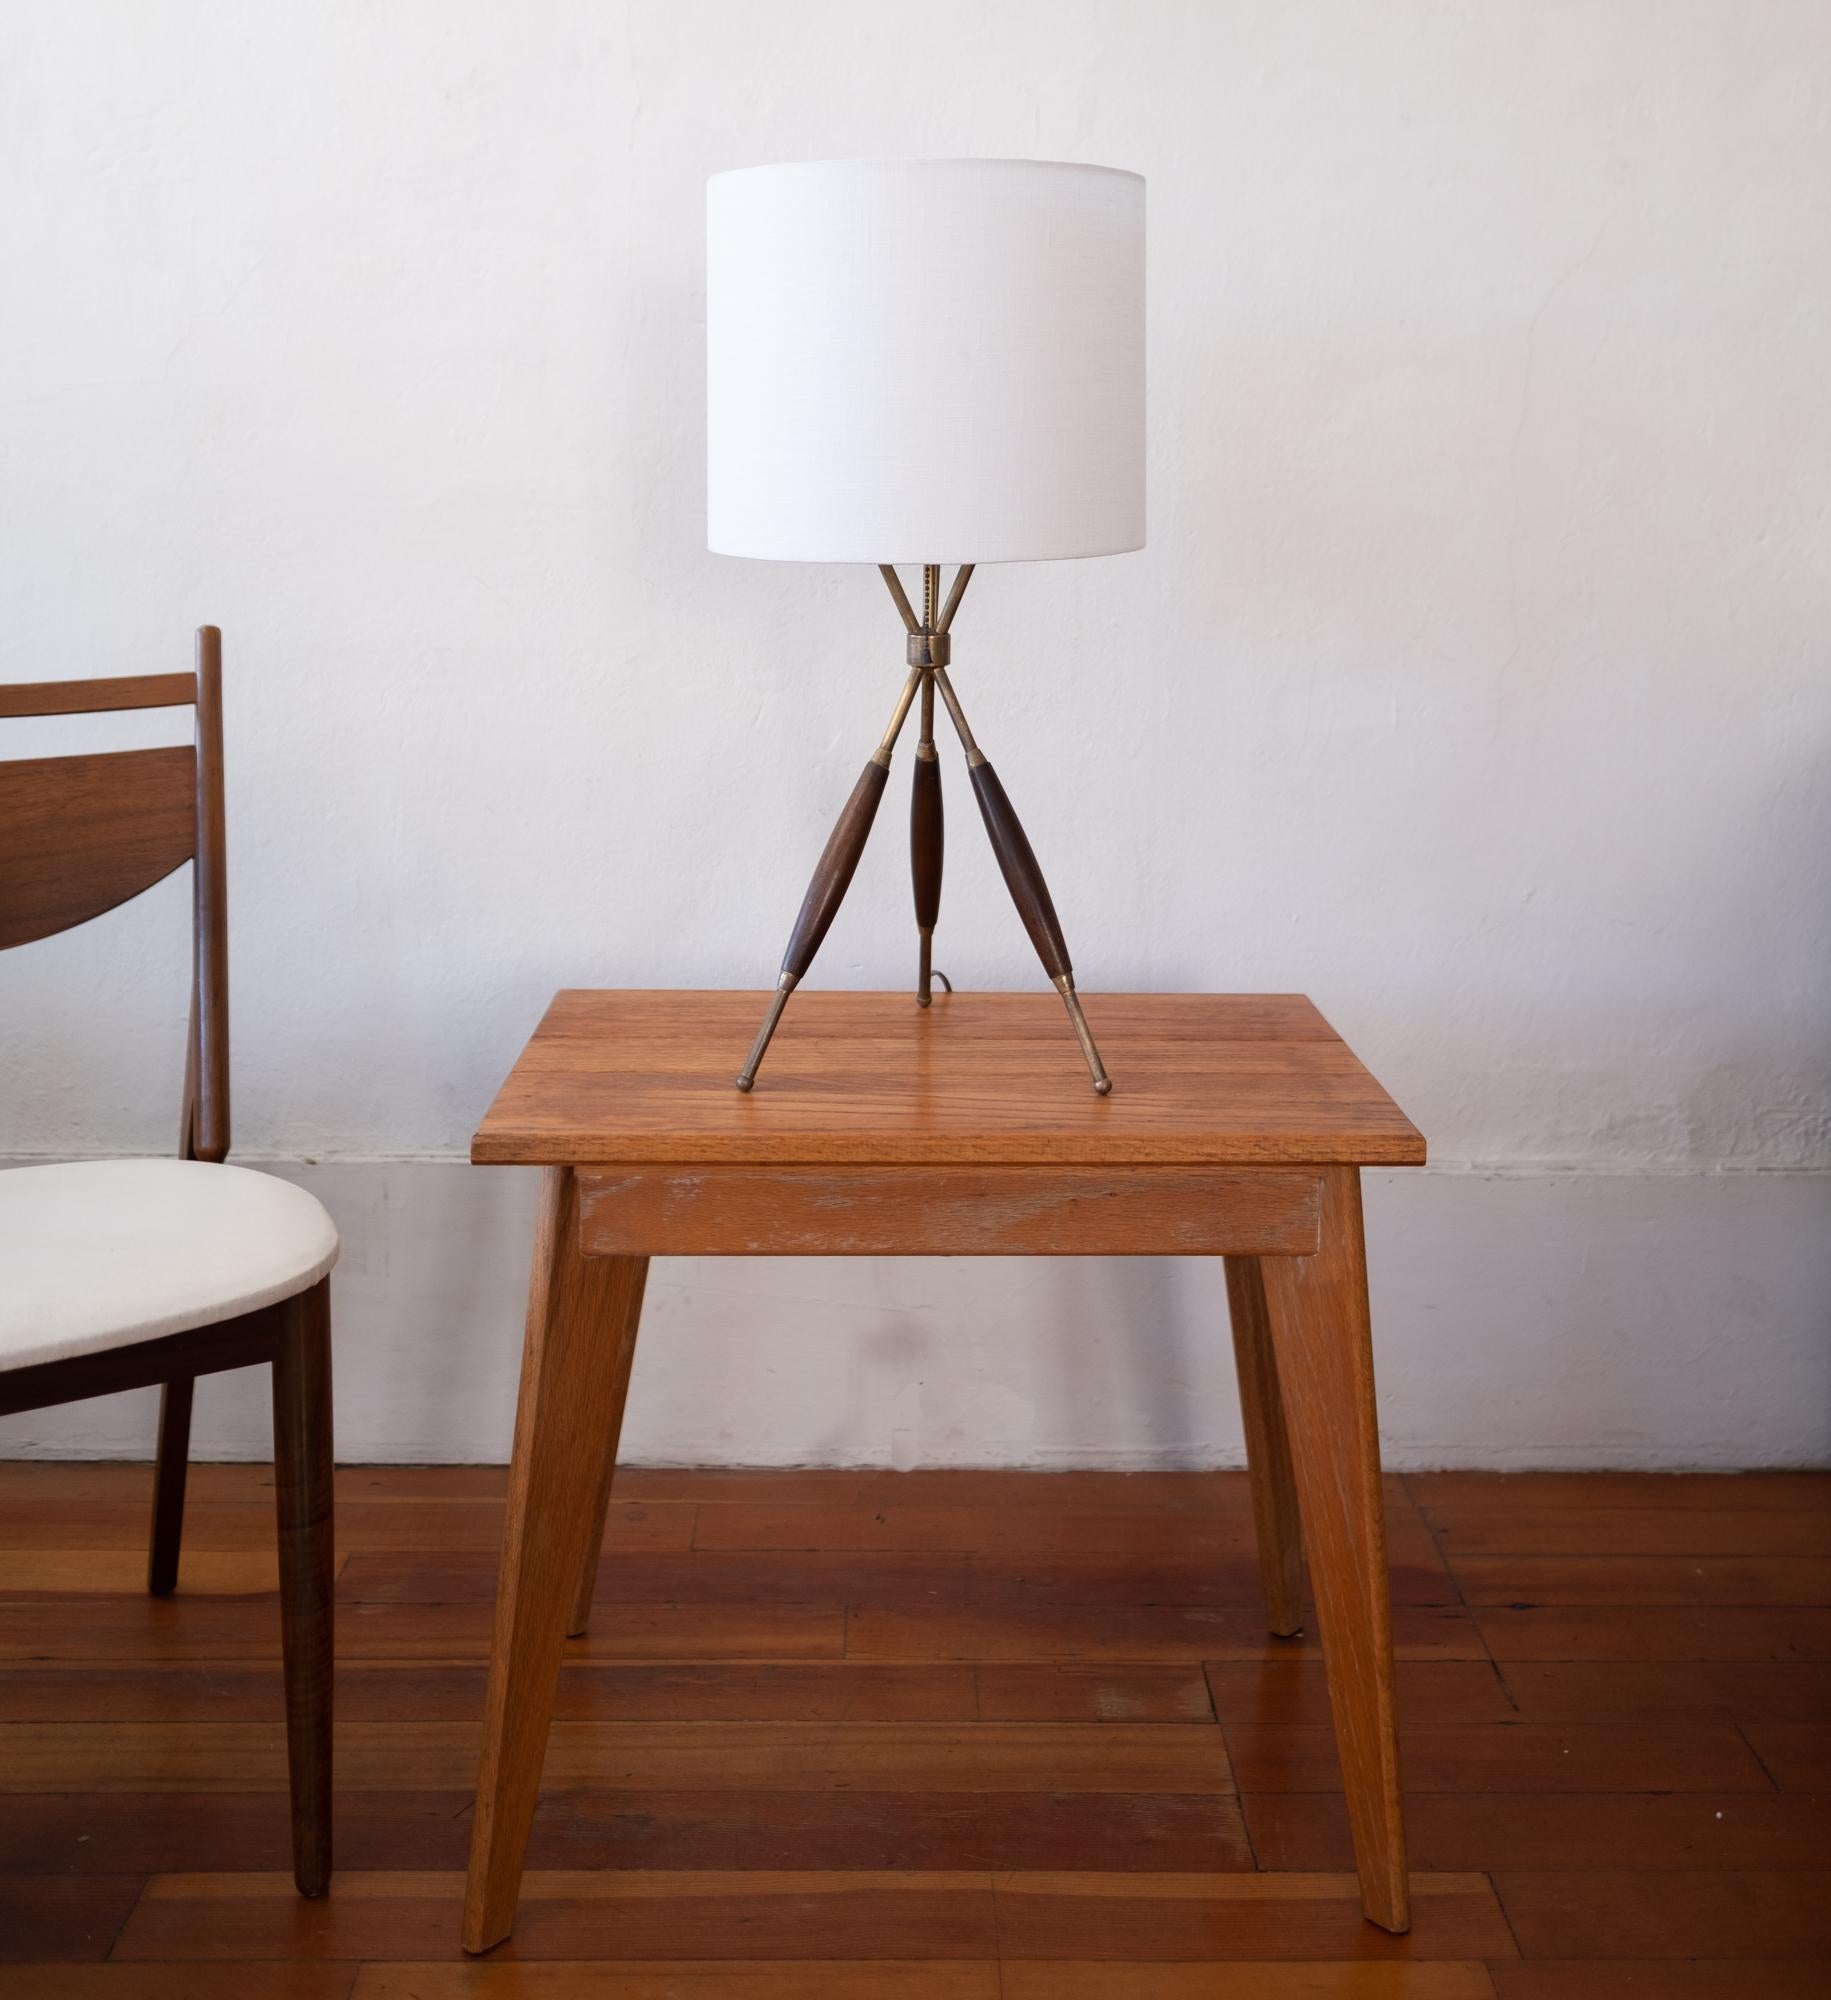 Midcentury brass and wood table lamp. High quality construction.